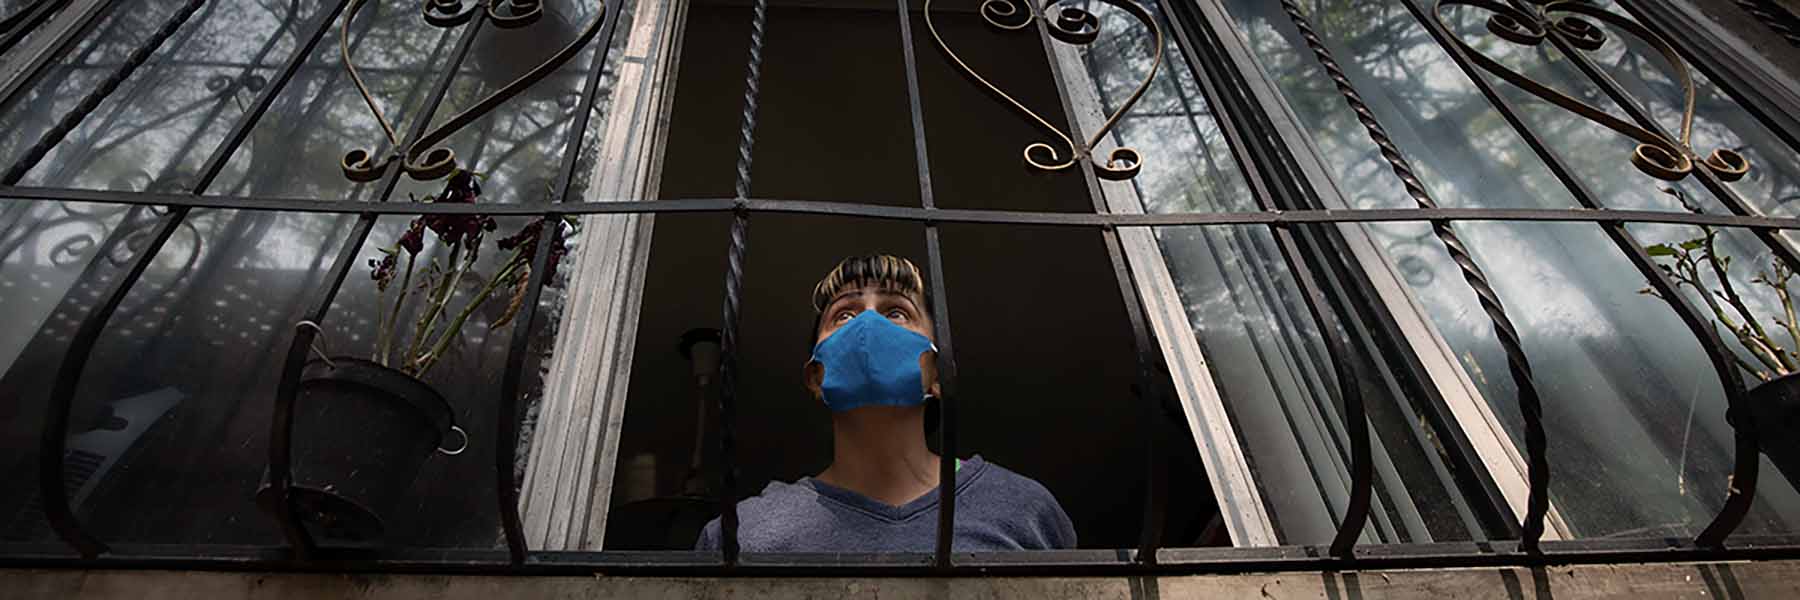 A person wearing a surgical mask while peering out of their window. Photo by Rodrigo Gonzalez on Unsplash.